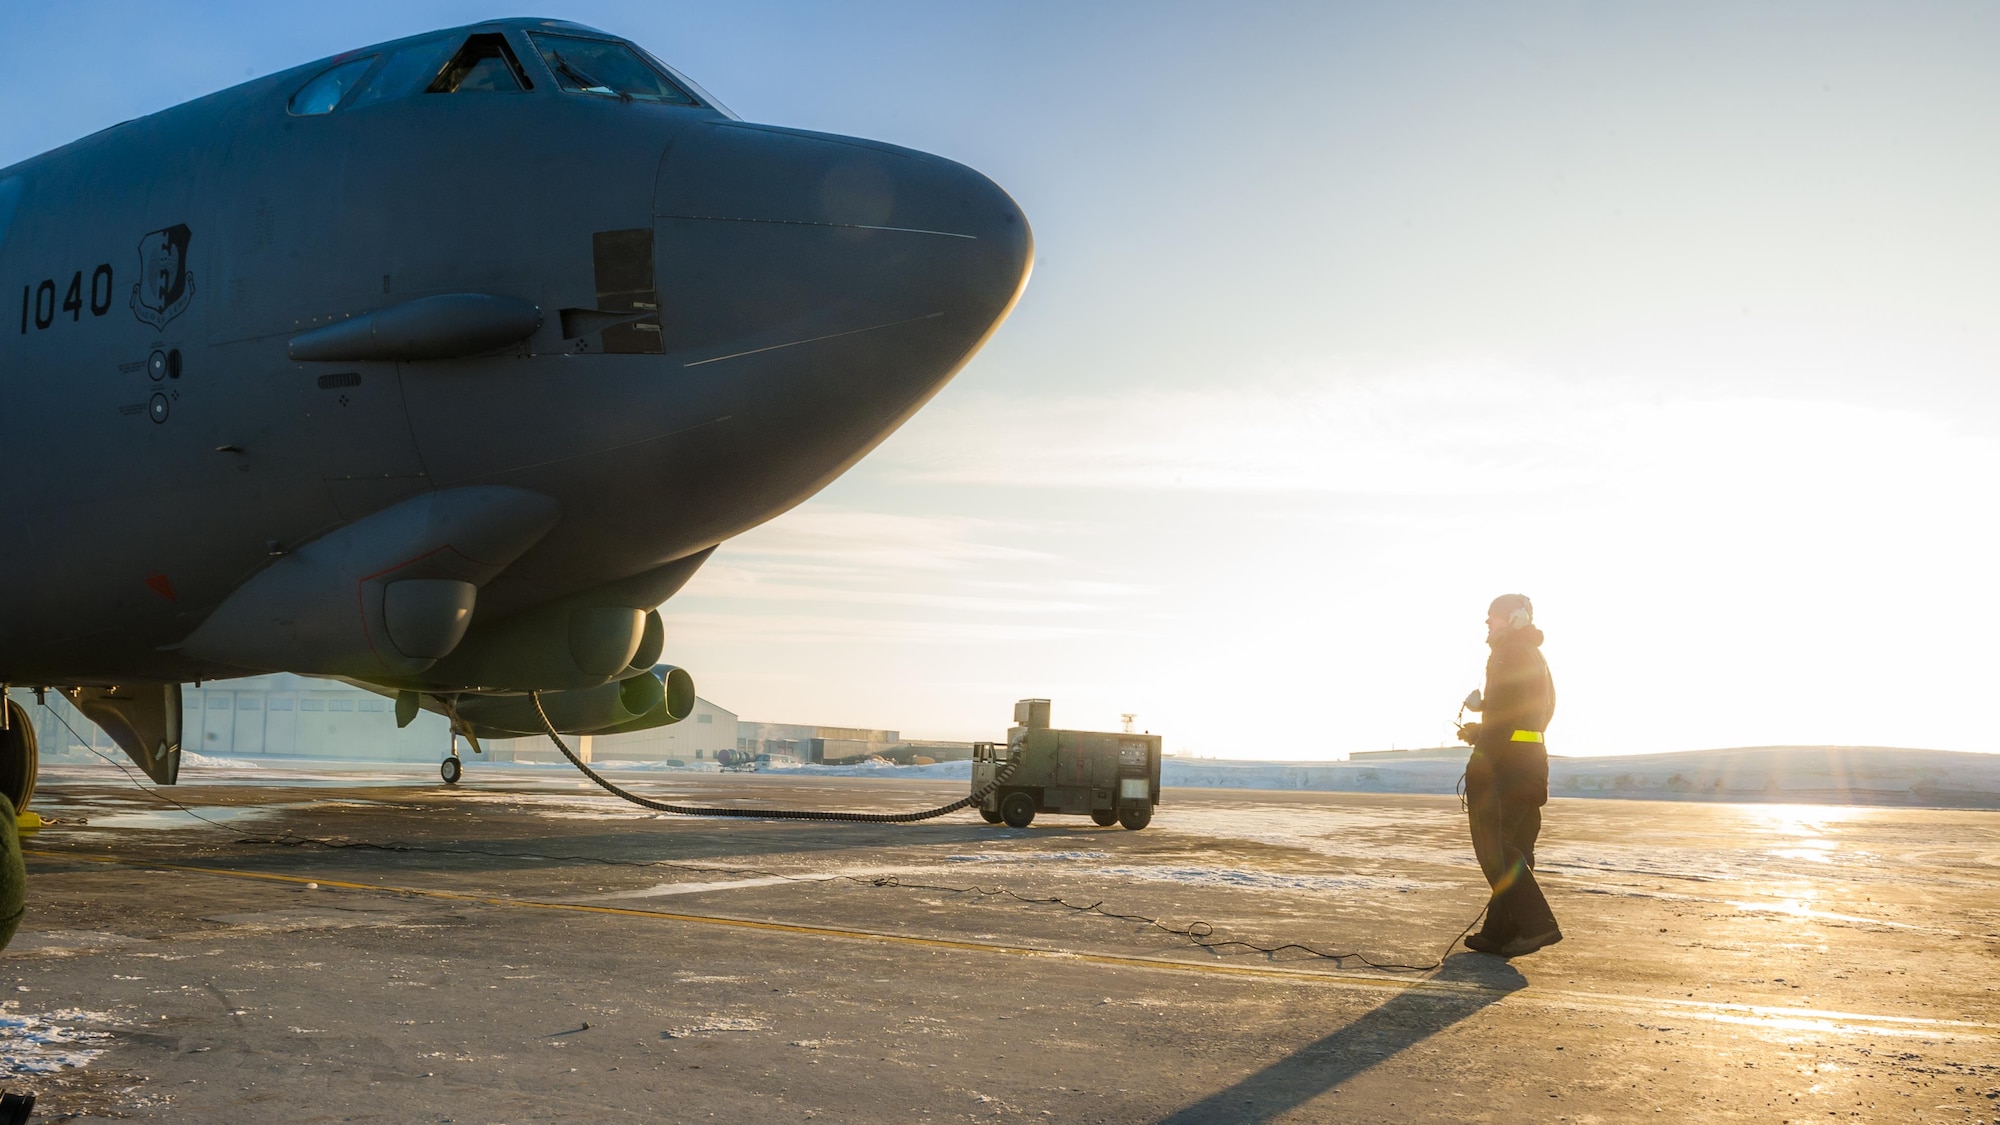 Senior Airman Josh Serafin, 5th Aircraft Maintenance Squadron crew chief, collects his headset cord prior to engines of a B-52H Stratofortress starting at Minot Air Force Base, N.D., Jan. 26, 2017. Foreign objects and debris on the flighline, aka FOD, can be pulled into the intake causing damage to the aircraft as well as a safety hazard for the aircrew. (U.S. Air Force photo/Senior Airman J.T. Armstrong)